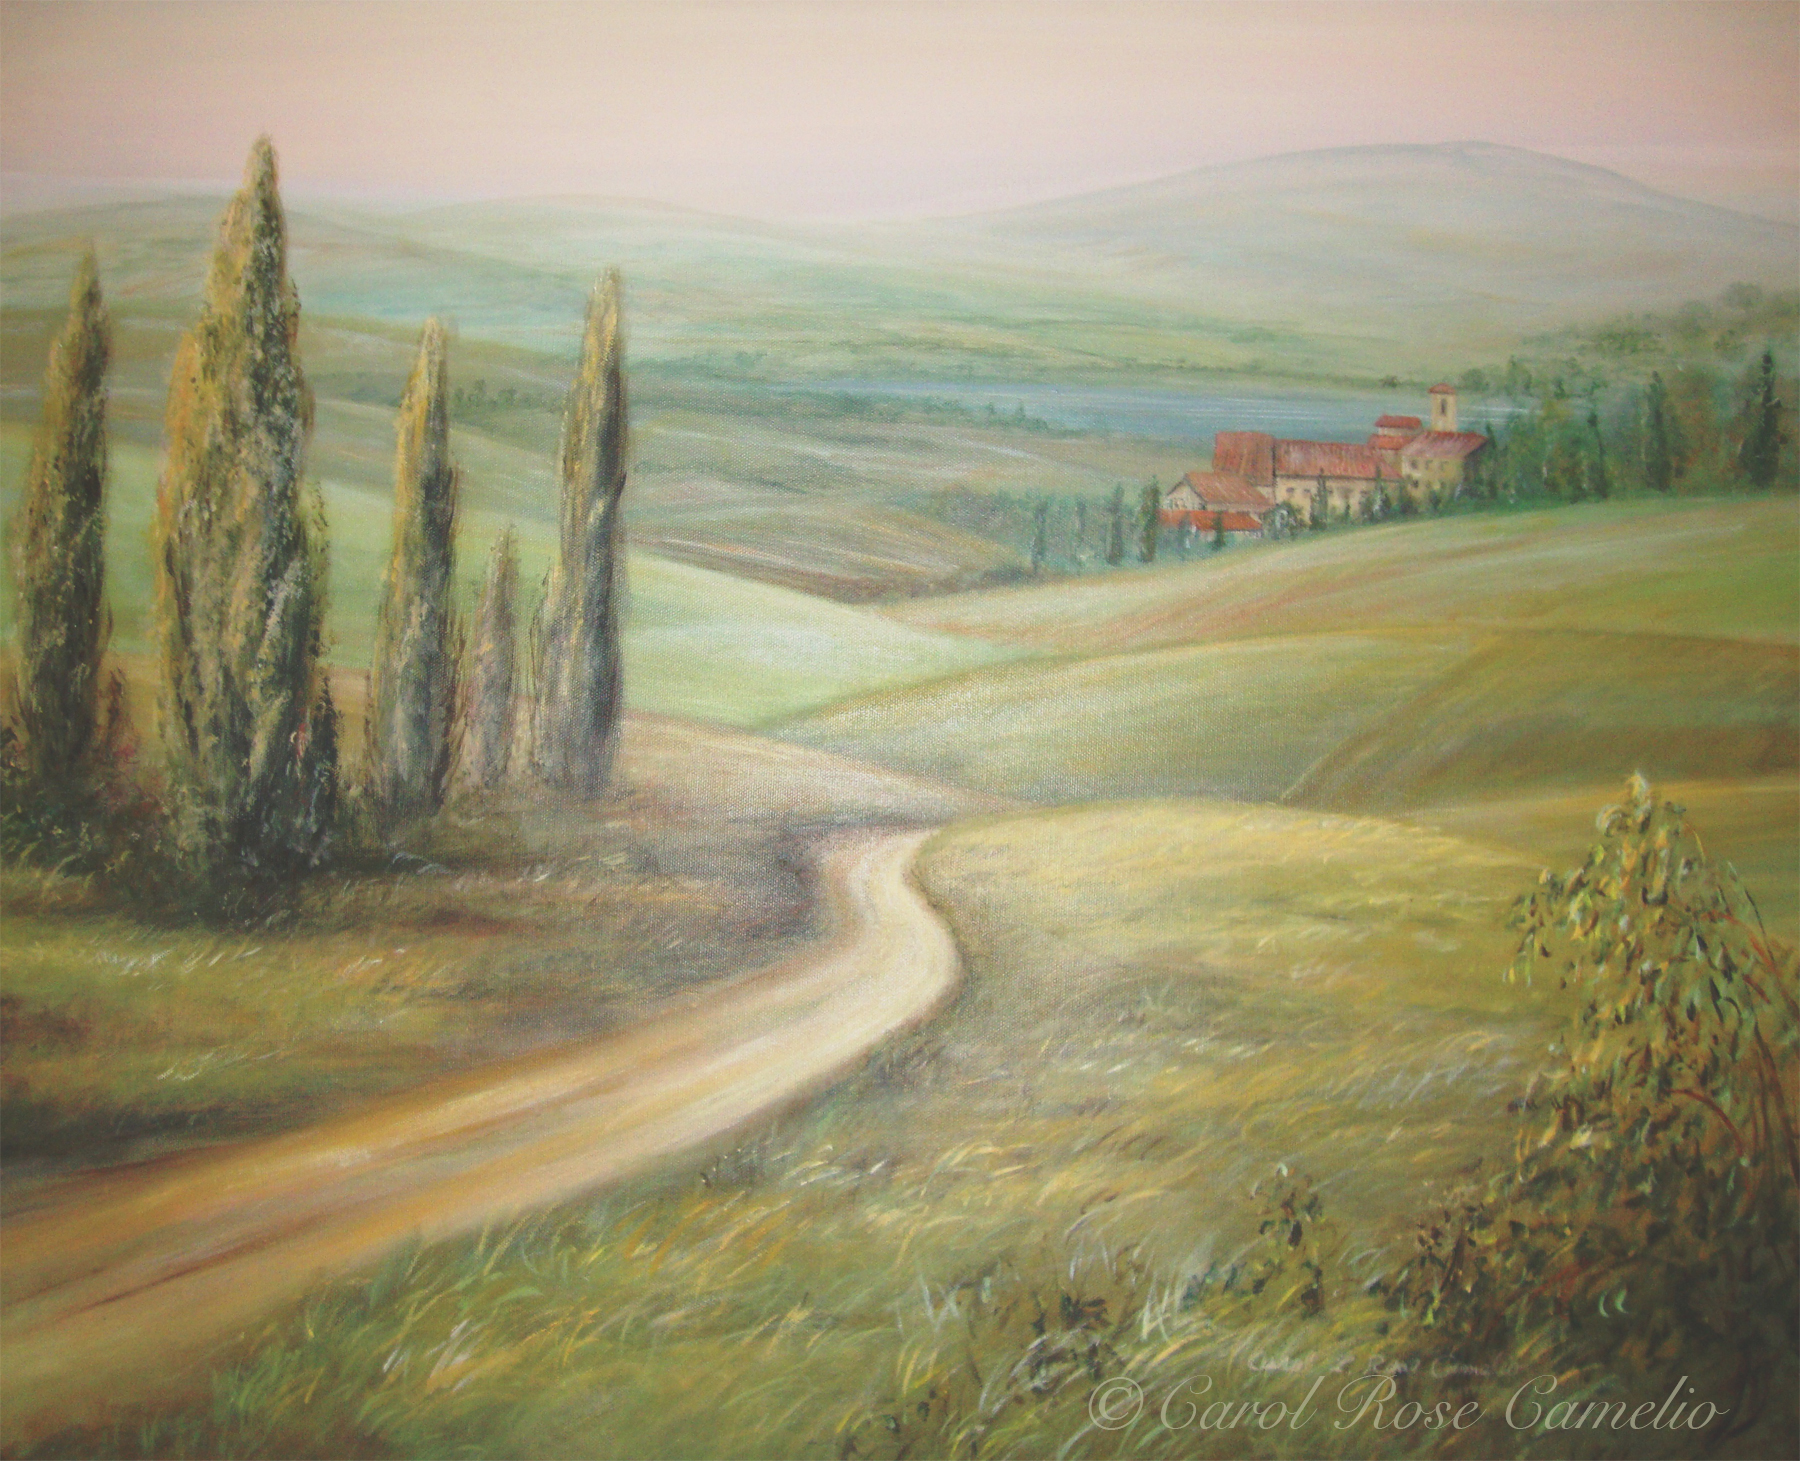 Tuscany: A countryside scene of a path leading across rolling hills.